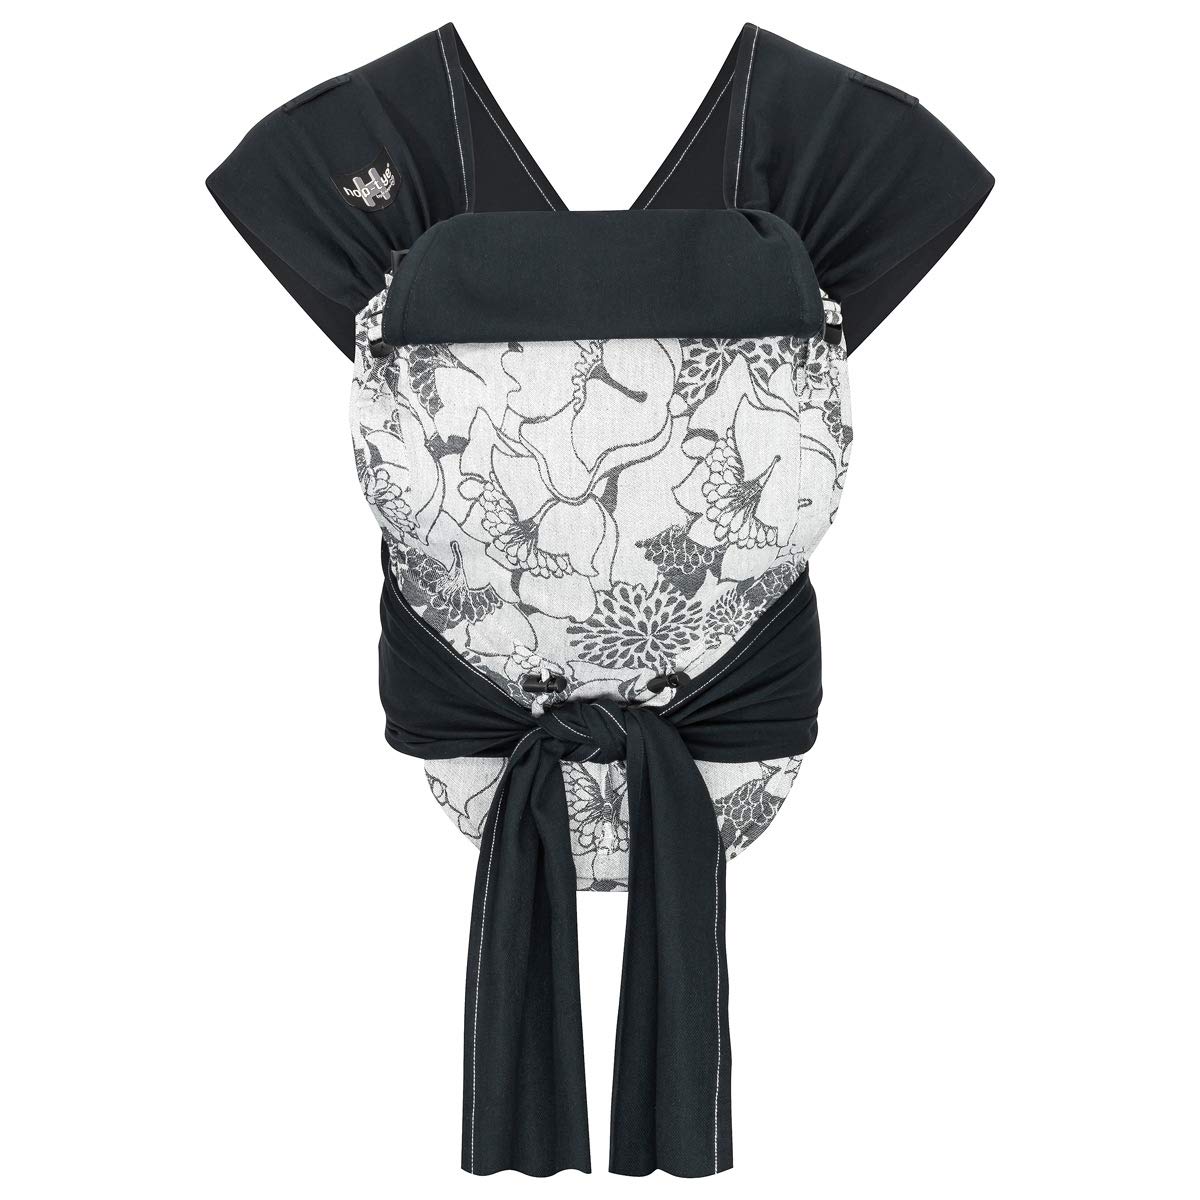 Hoppediz Hop-tye Buckle - Baby Carrier I Halfbuckle I Mei Tai I Belly and Back Carrier I Florence Design One Size Fits Hips up to 160 cm